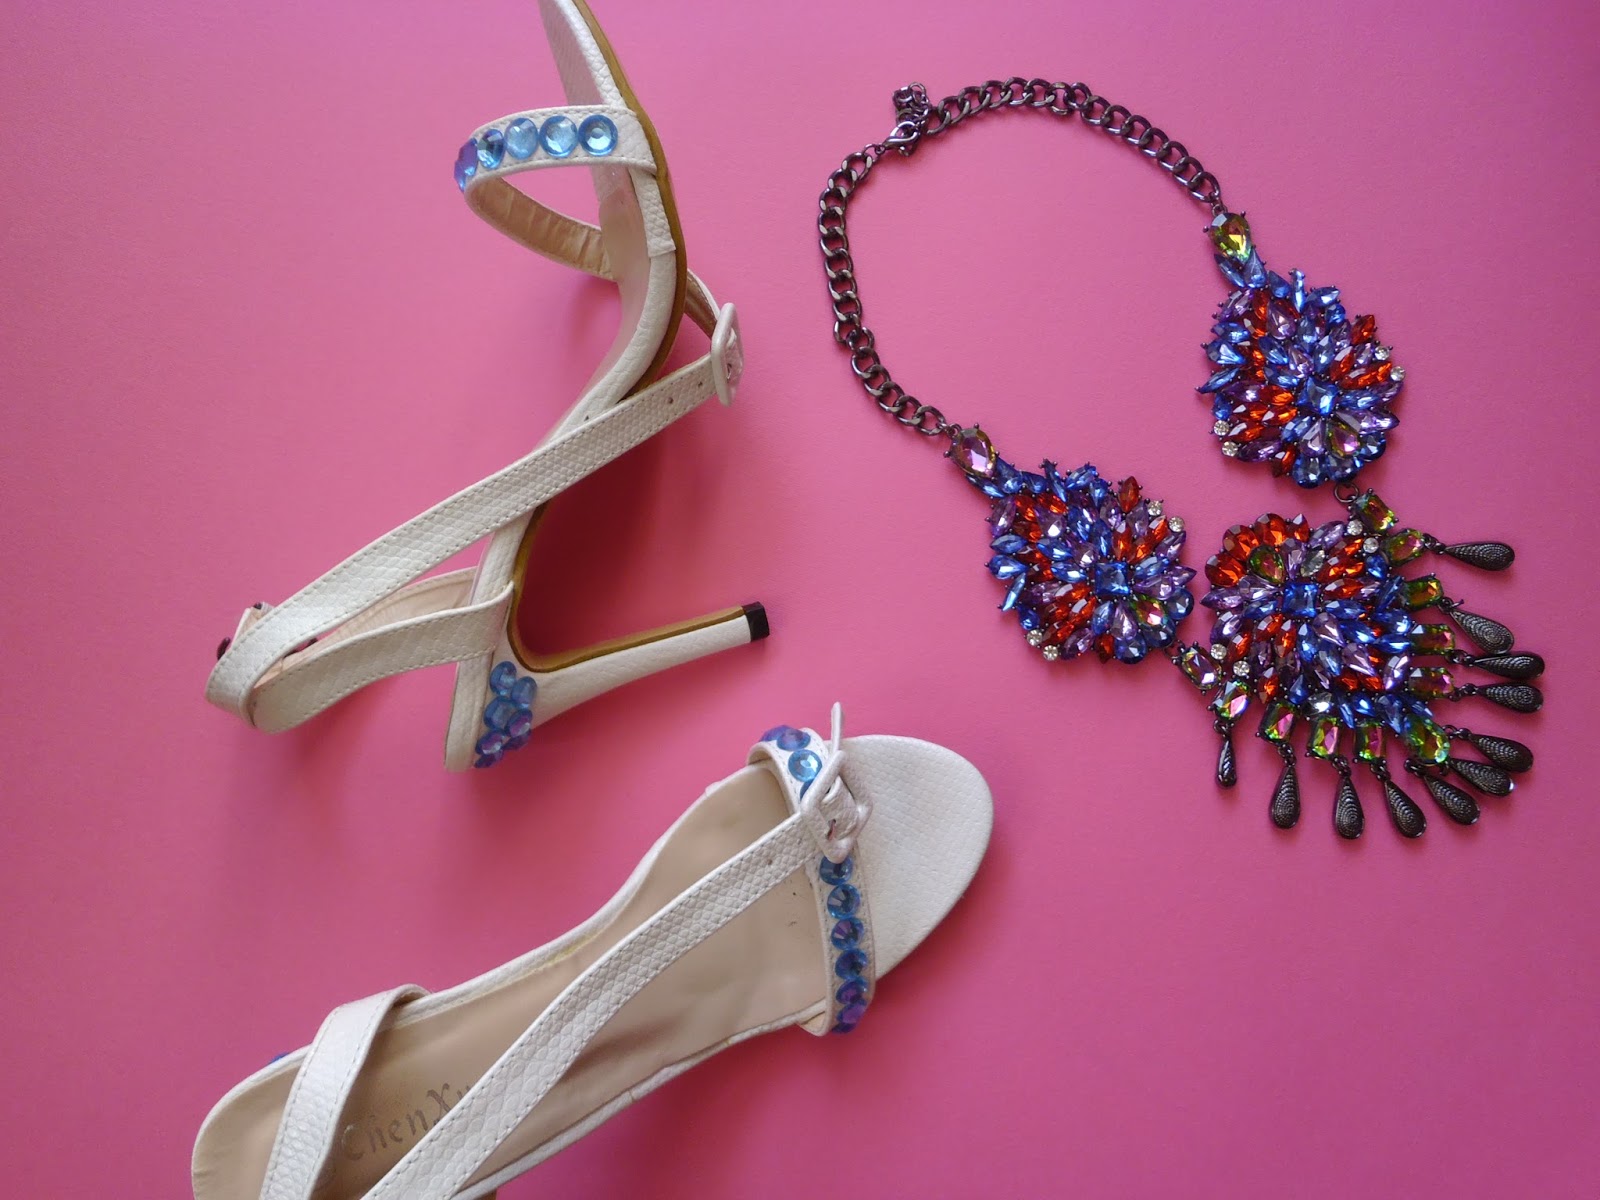 BEAUTY LIBRA: VERY SIMPLY DIY - MAKE YOUR SIMPLE SANDALS LOOK`S INTERESTING